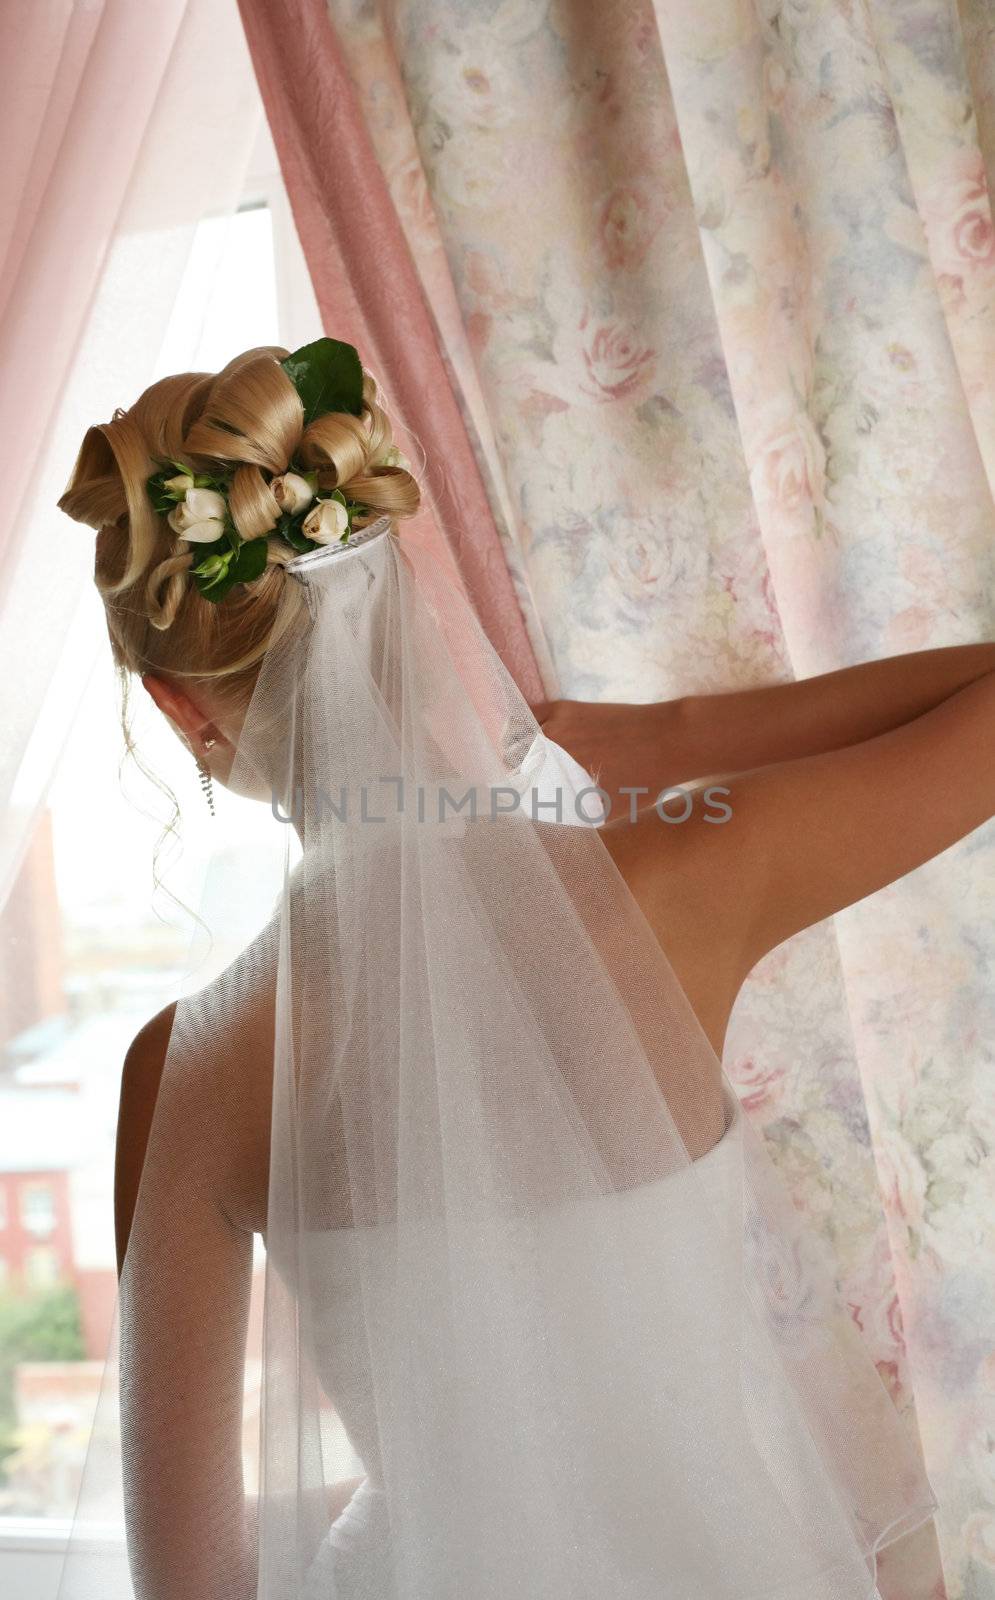 The bride at a window expects the groom